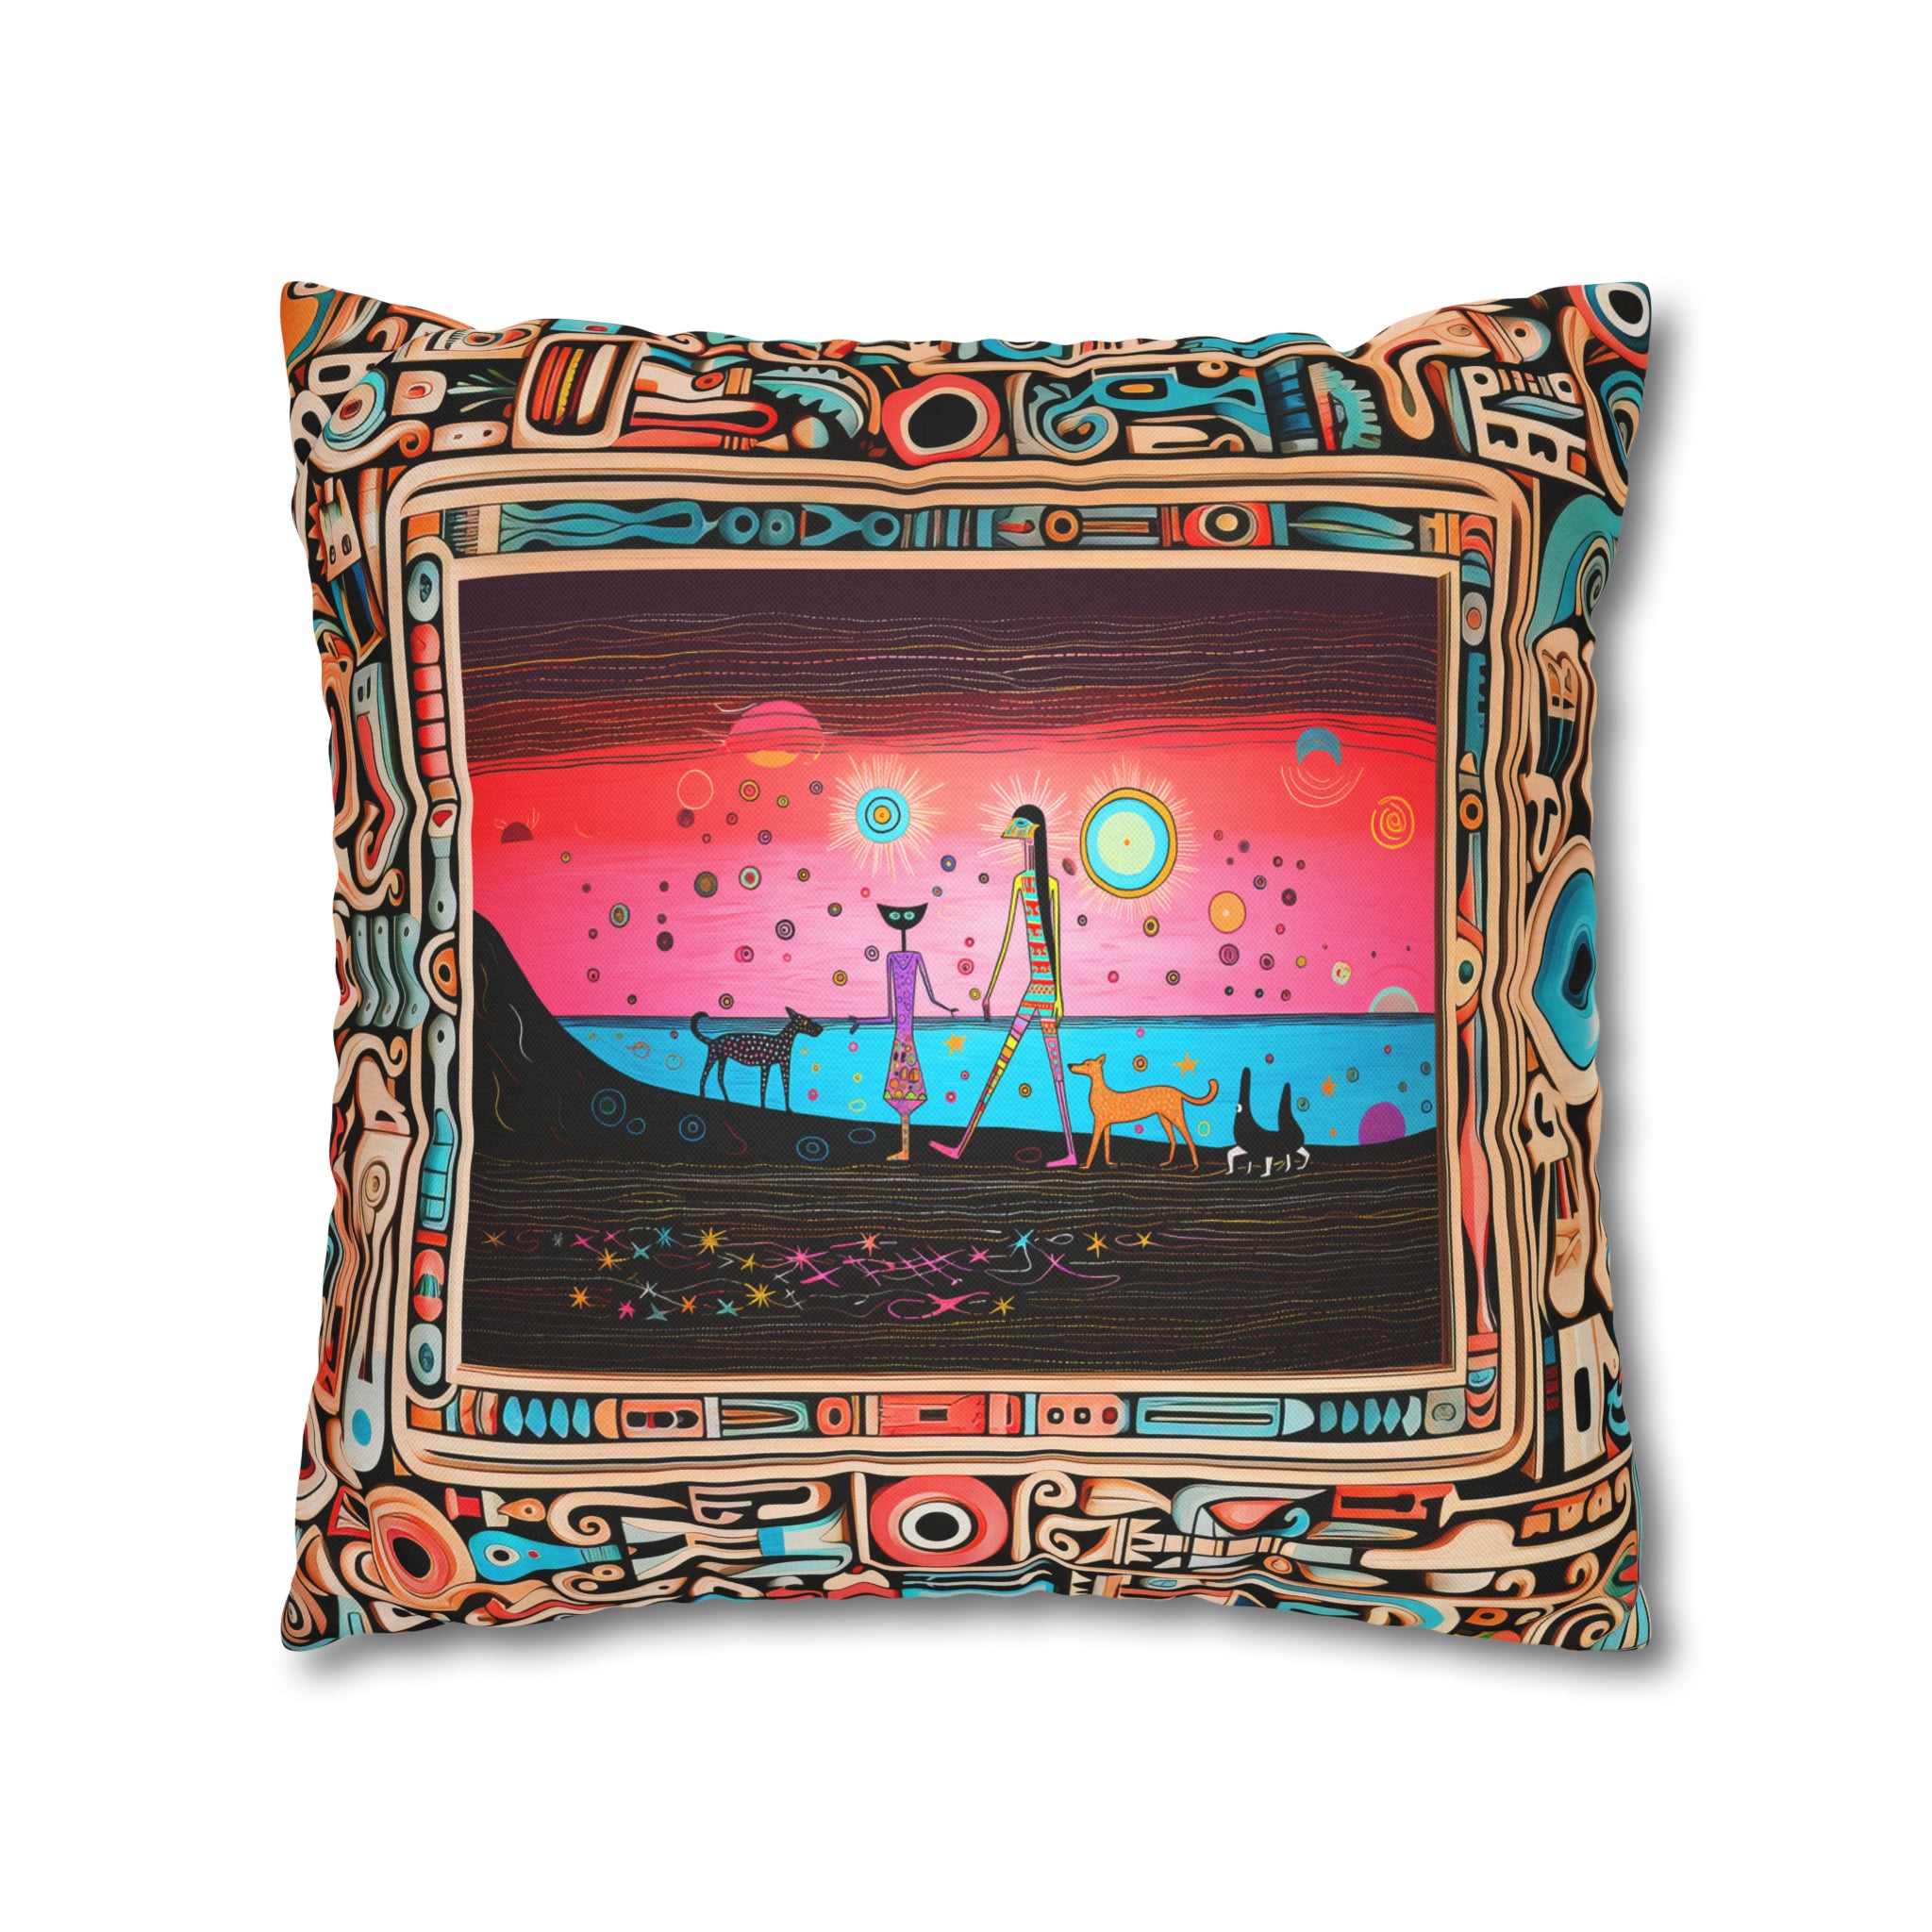 Square Pillow Case 18" x 18", CASE ONLY, no pillow form, original Pop Art Style, Walking on Black Sand Beach, in a Frame